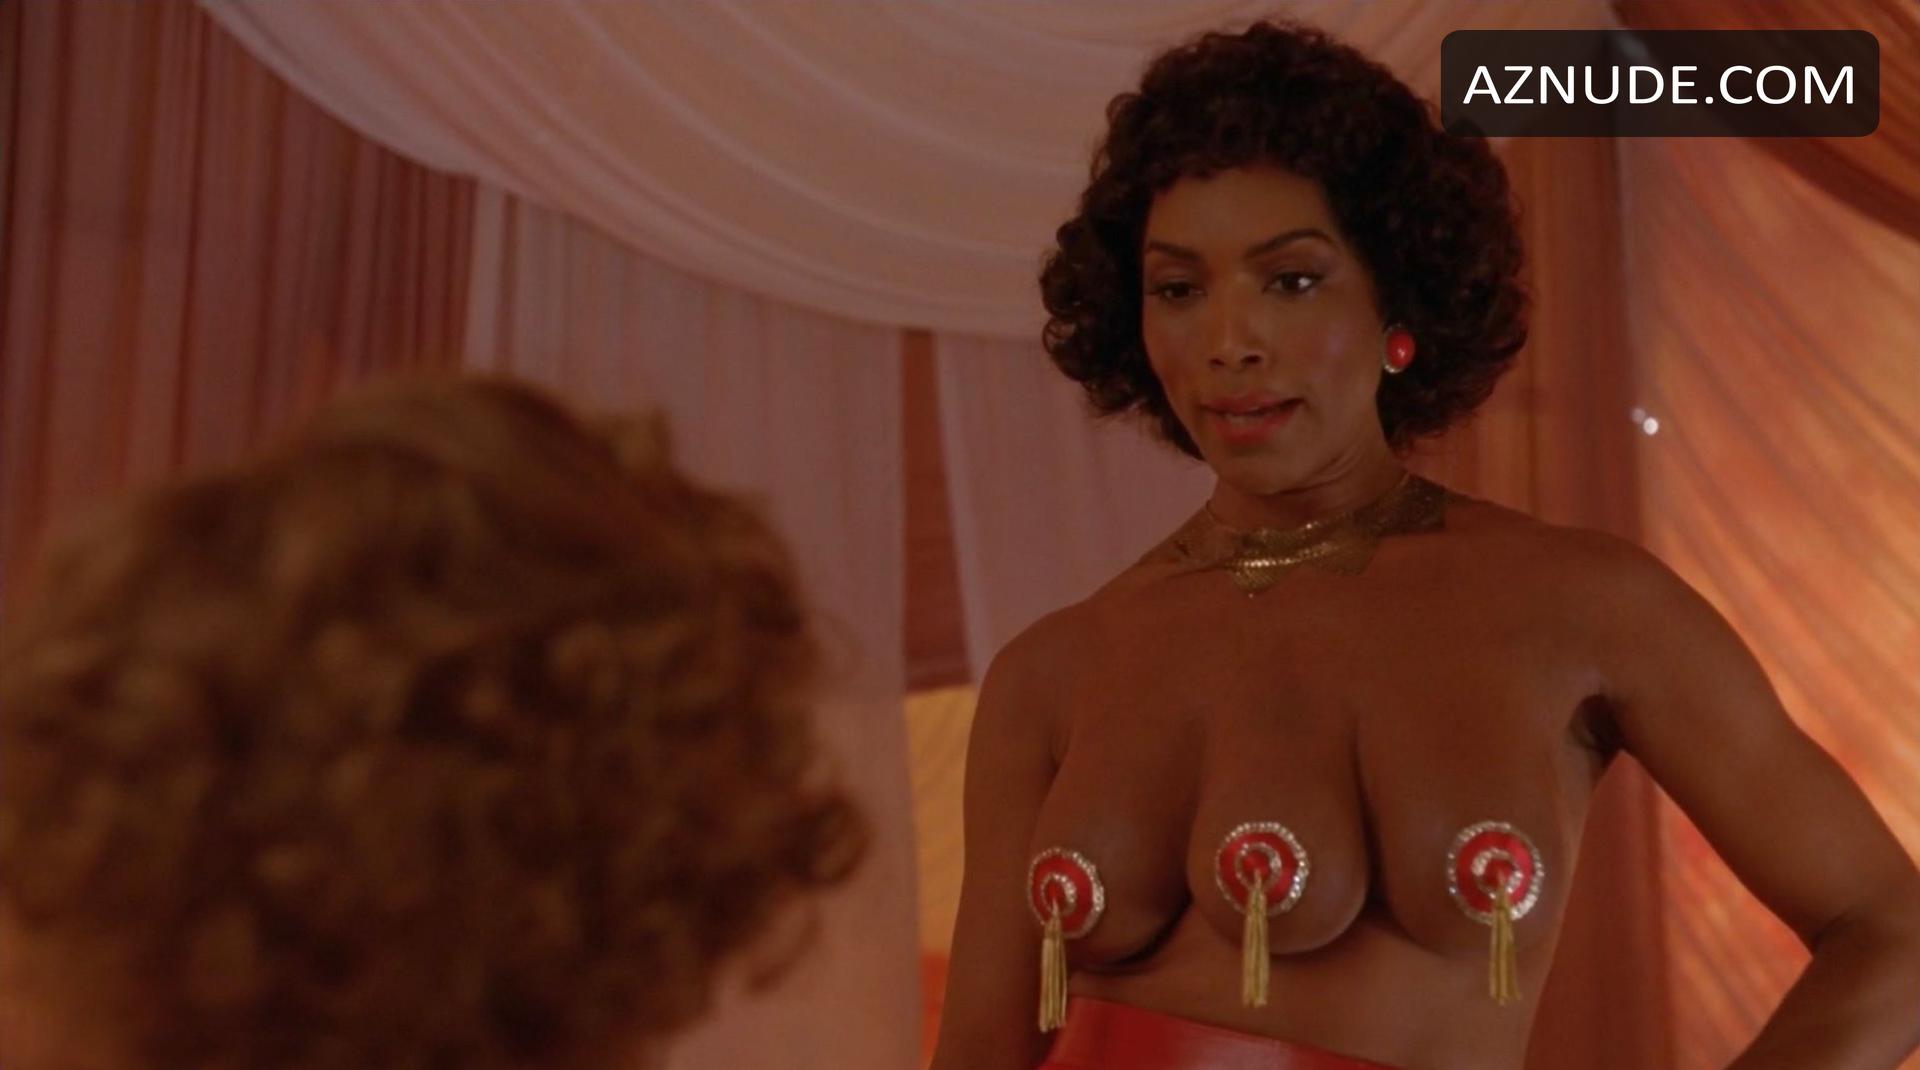 Nude pictures of angela bassett